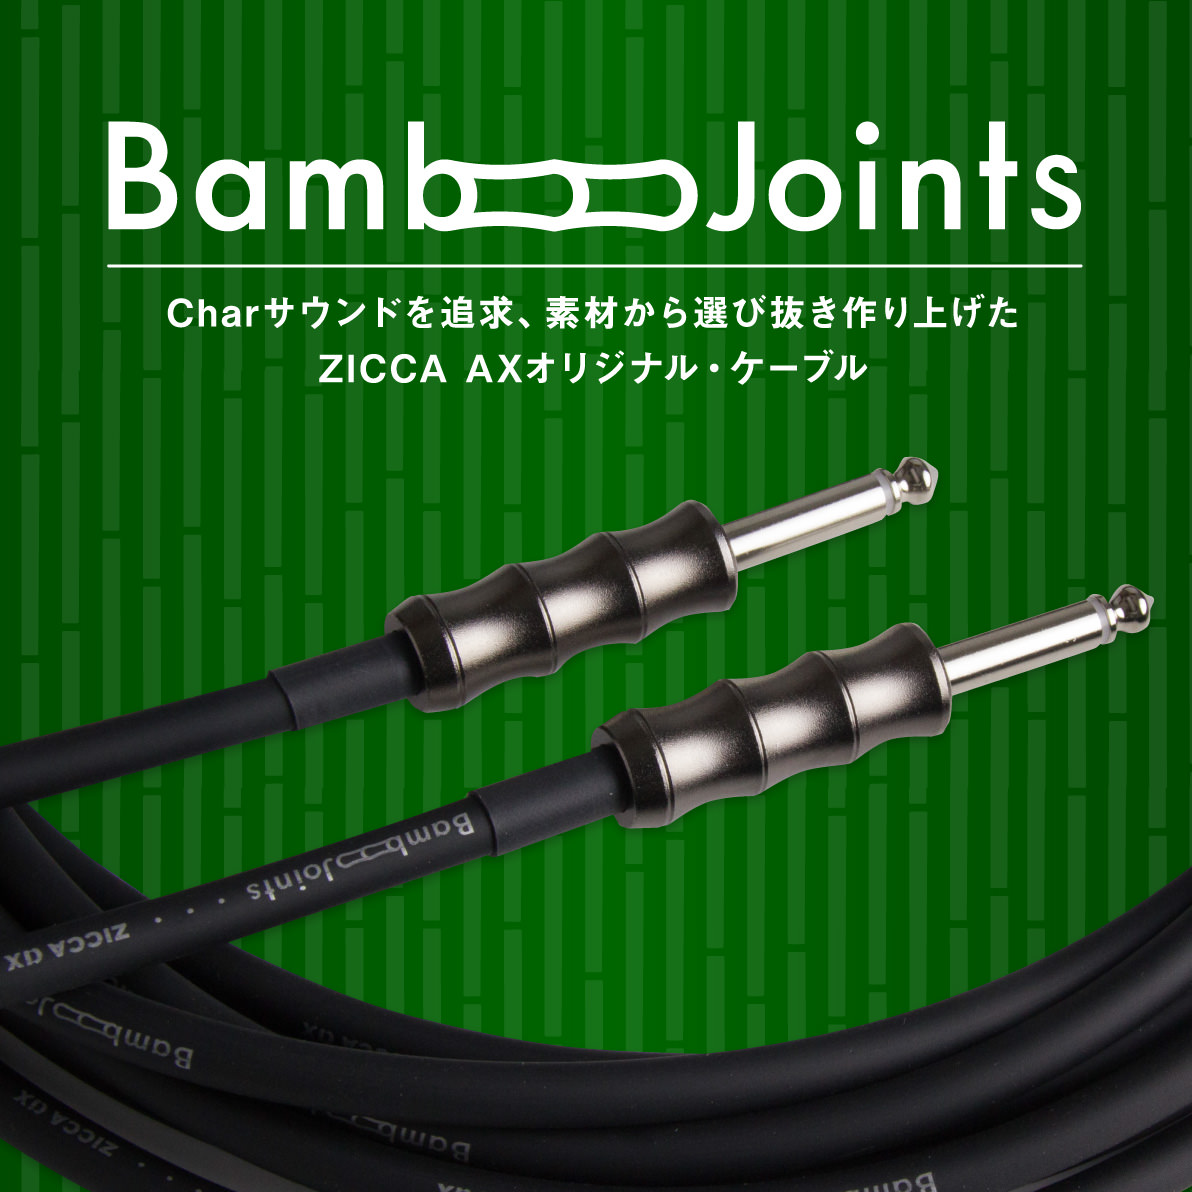 Bamboo Joints